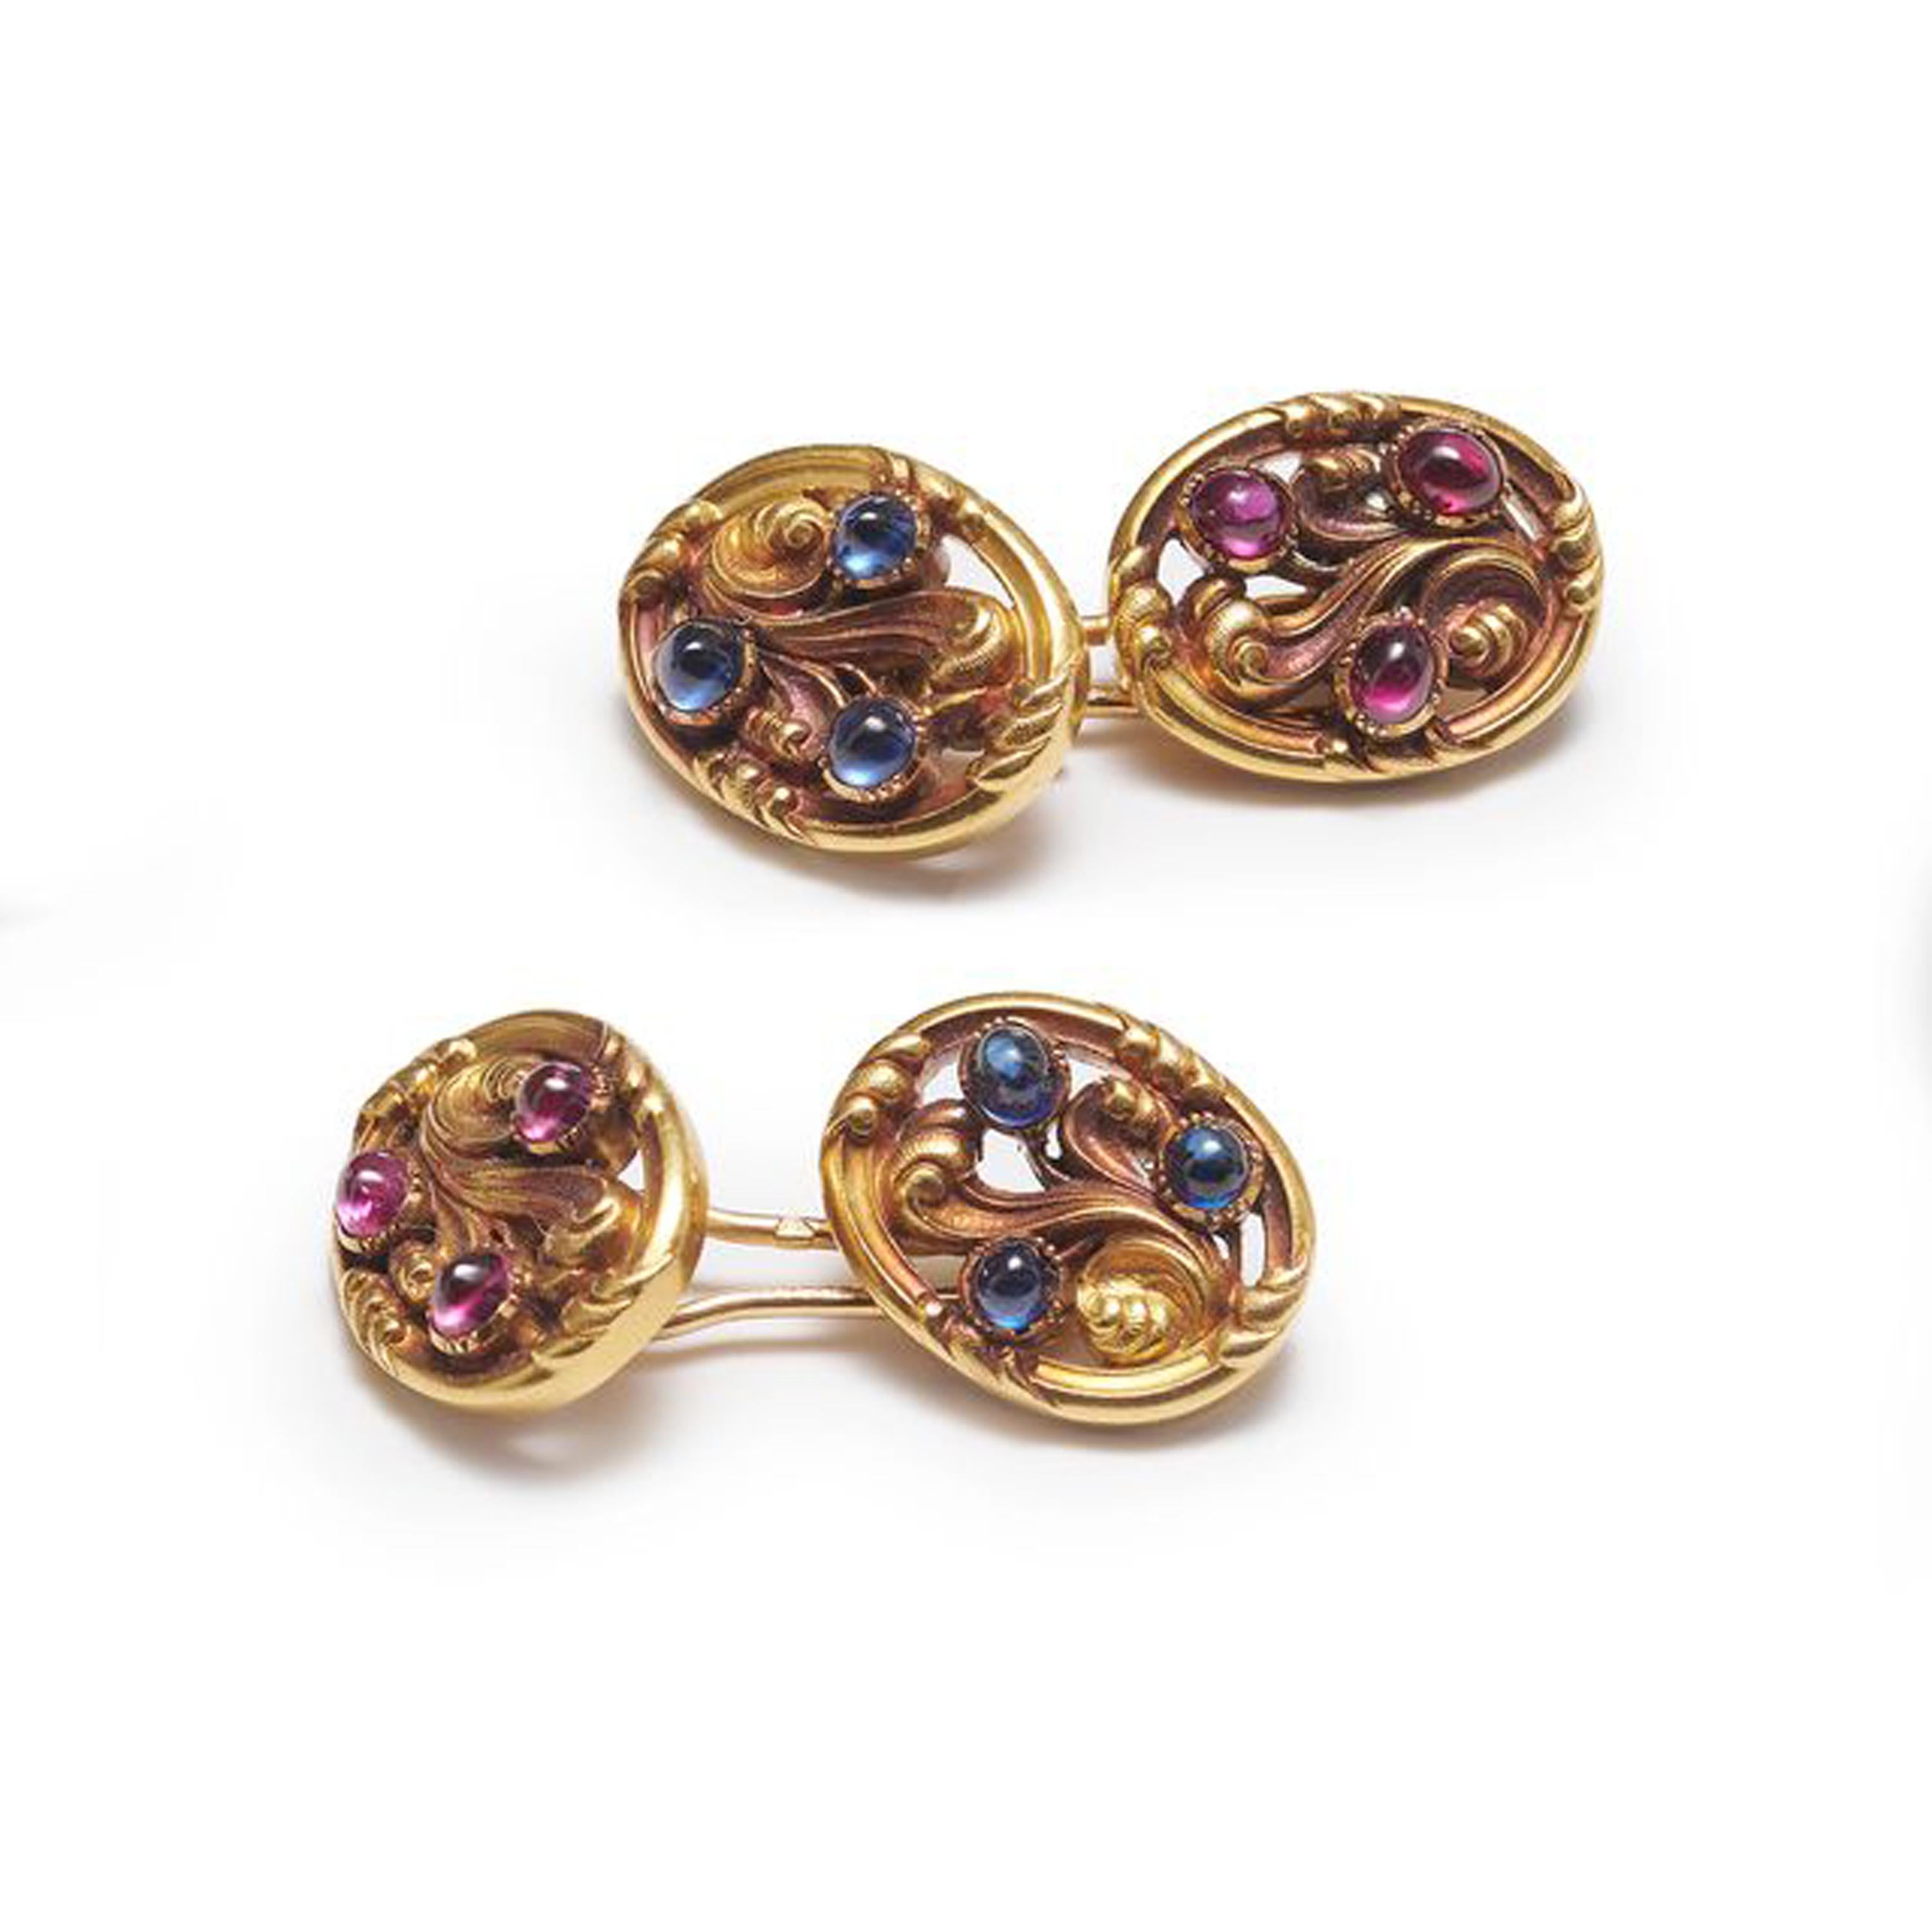 Tiffany & Co. Art Nouveau Sapphire Ruby and Gold Cufflinks, Circa 1890 For Sale 5